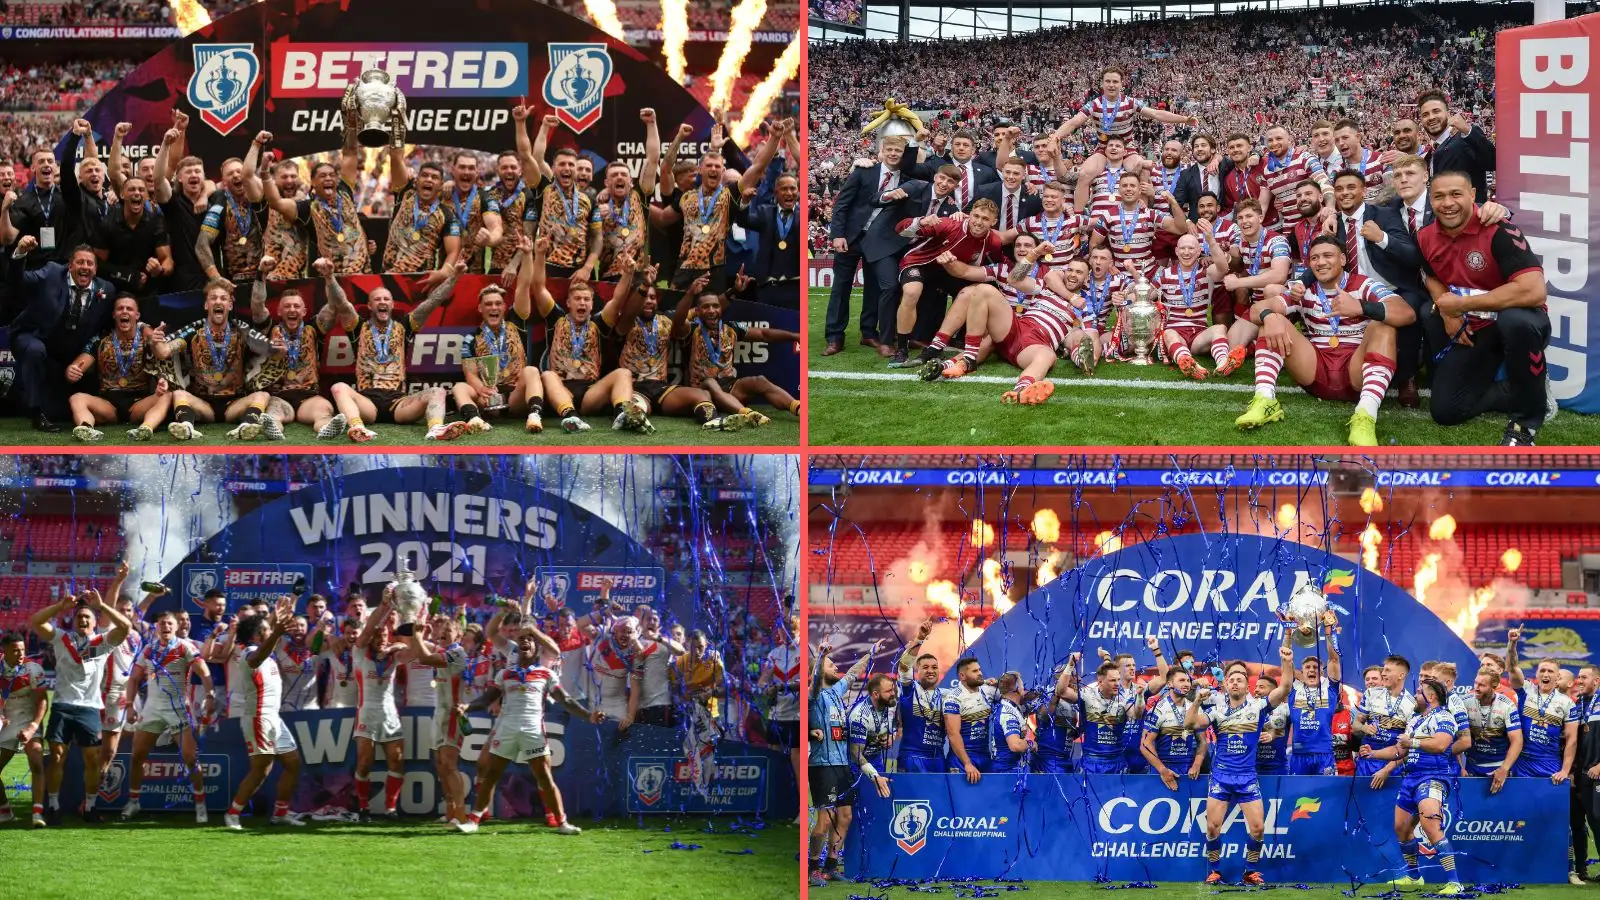 Leigh Leopards (2023), Wigan Warriors (2022), St Helens (2021) & Leeds Rhinos (2020) lift the Challenge Cup